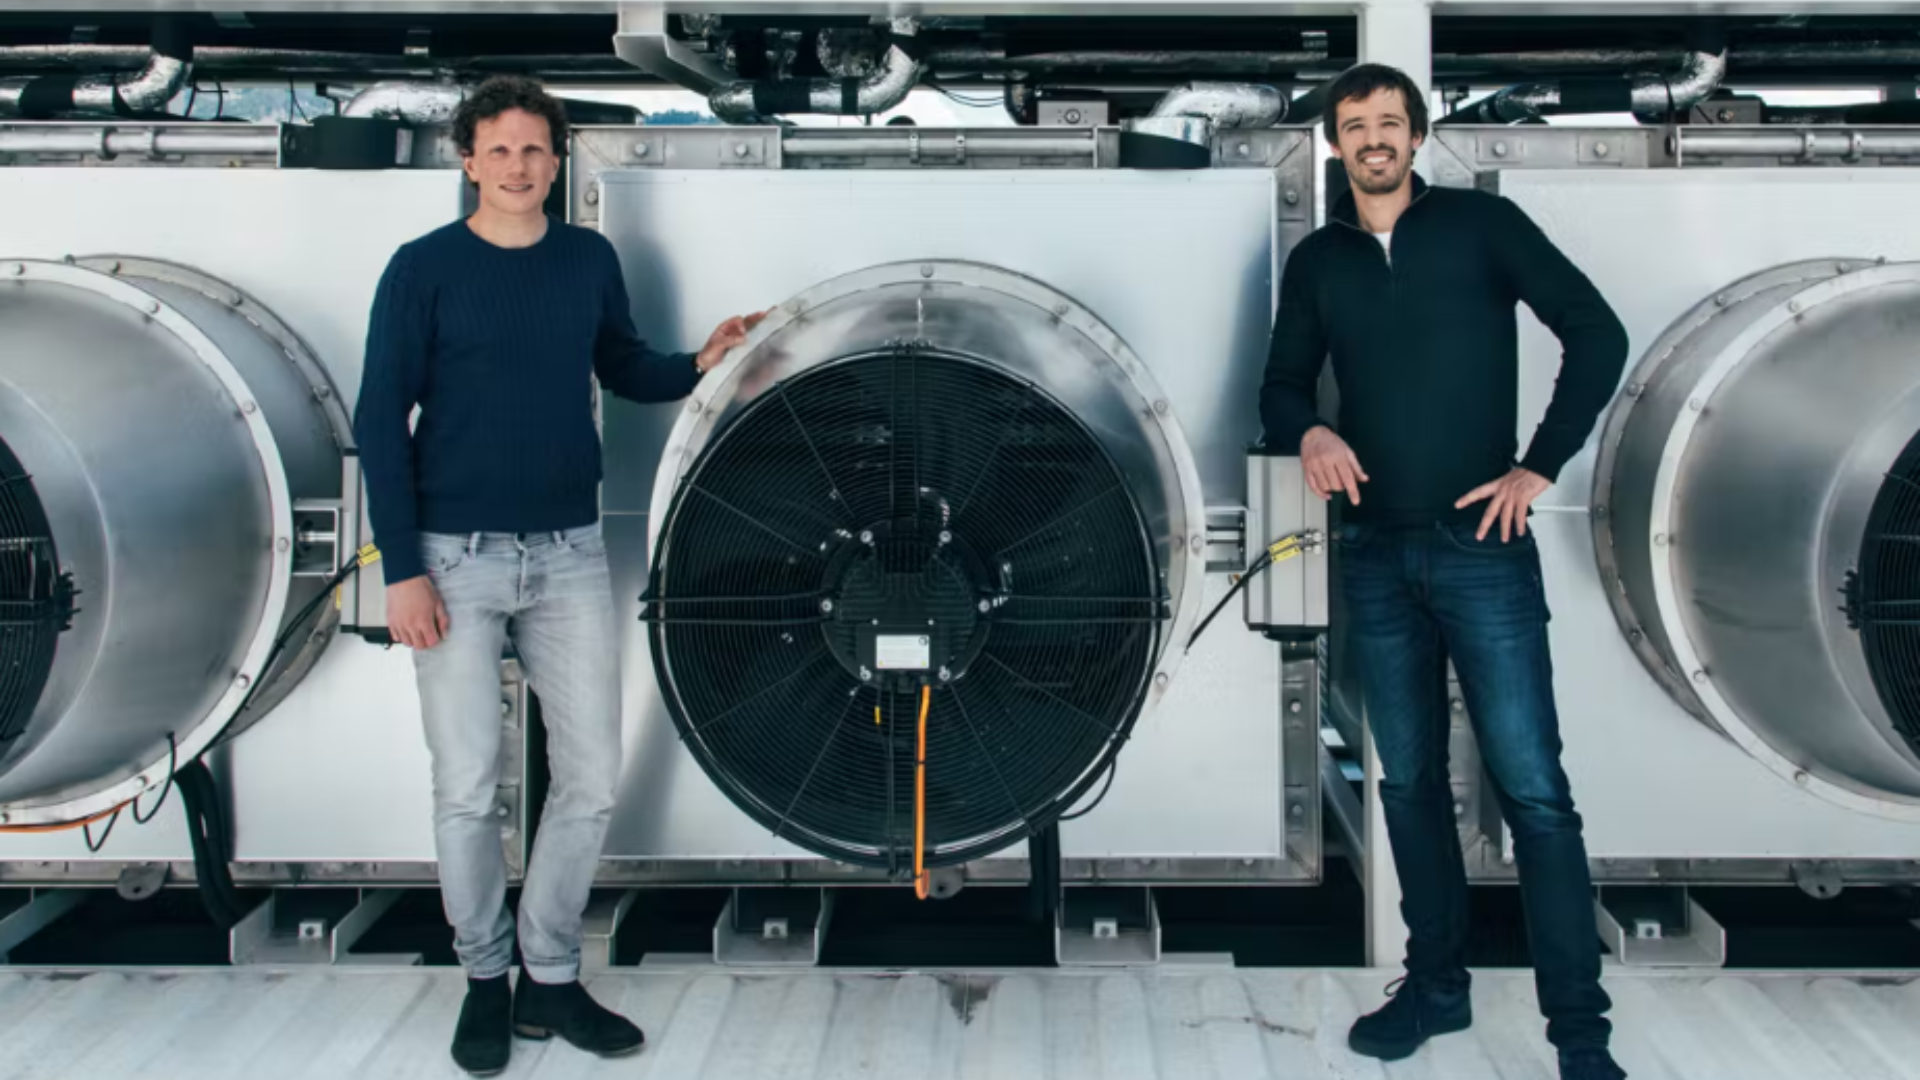 Founders of climate tech company Climeworks Jan Wurzbacher and Christoph Gebald in front of their direct air capture plant for CO2 removal.